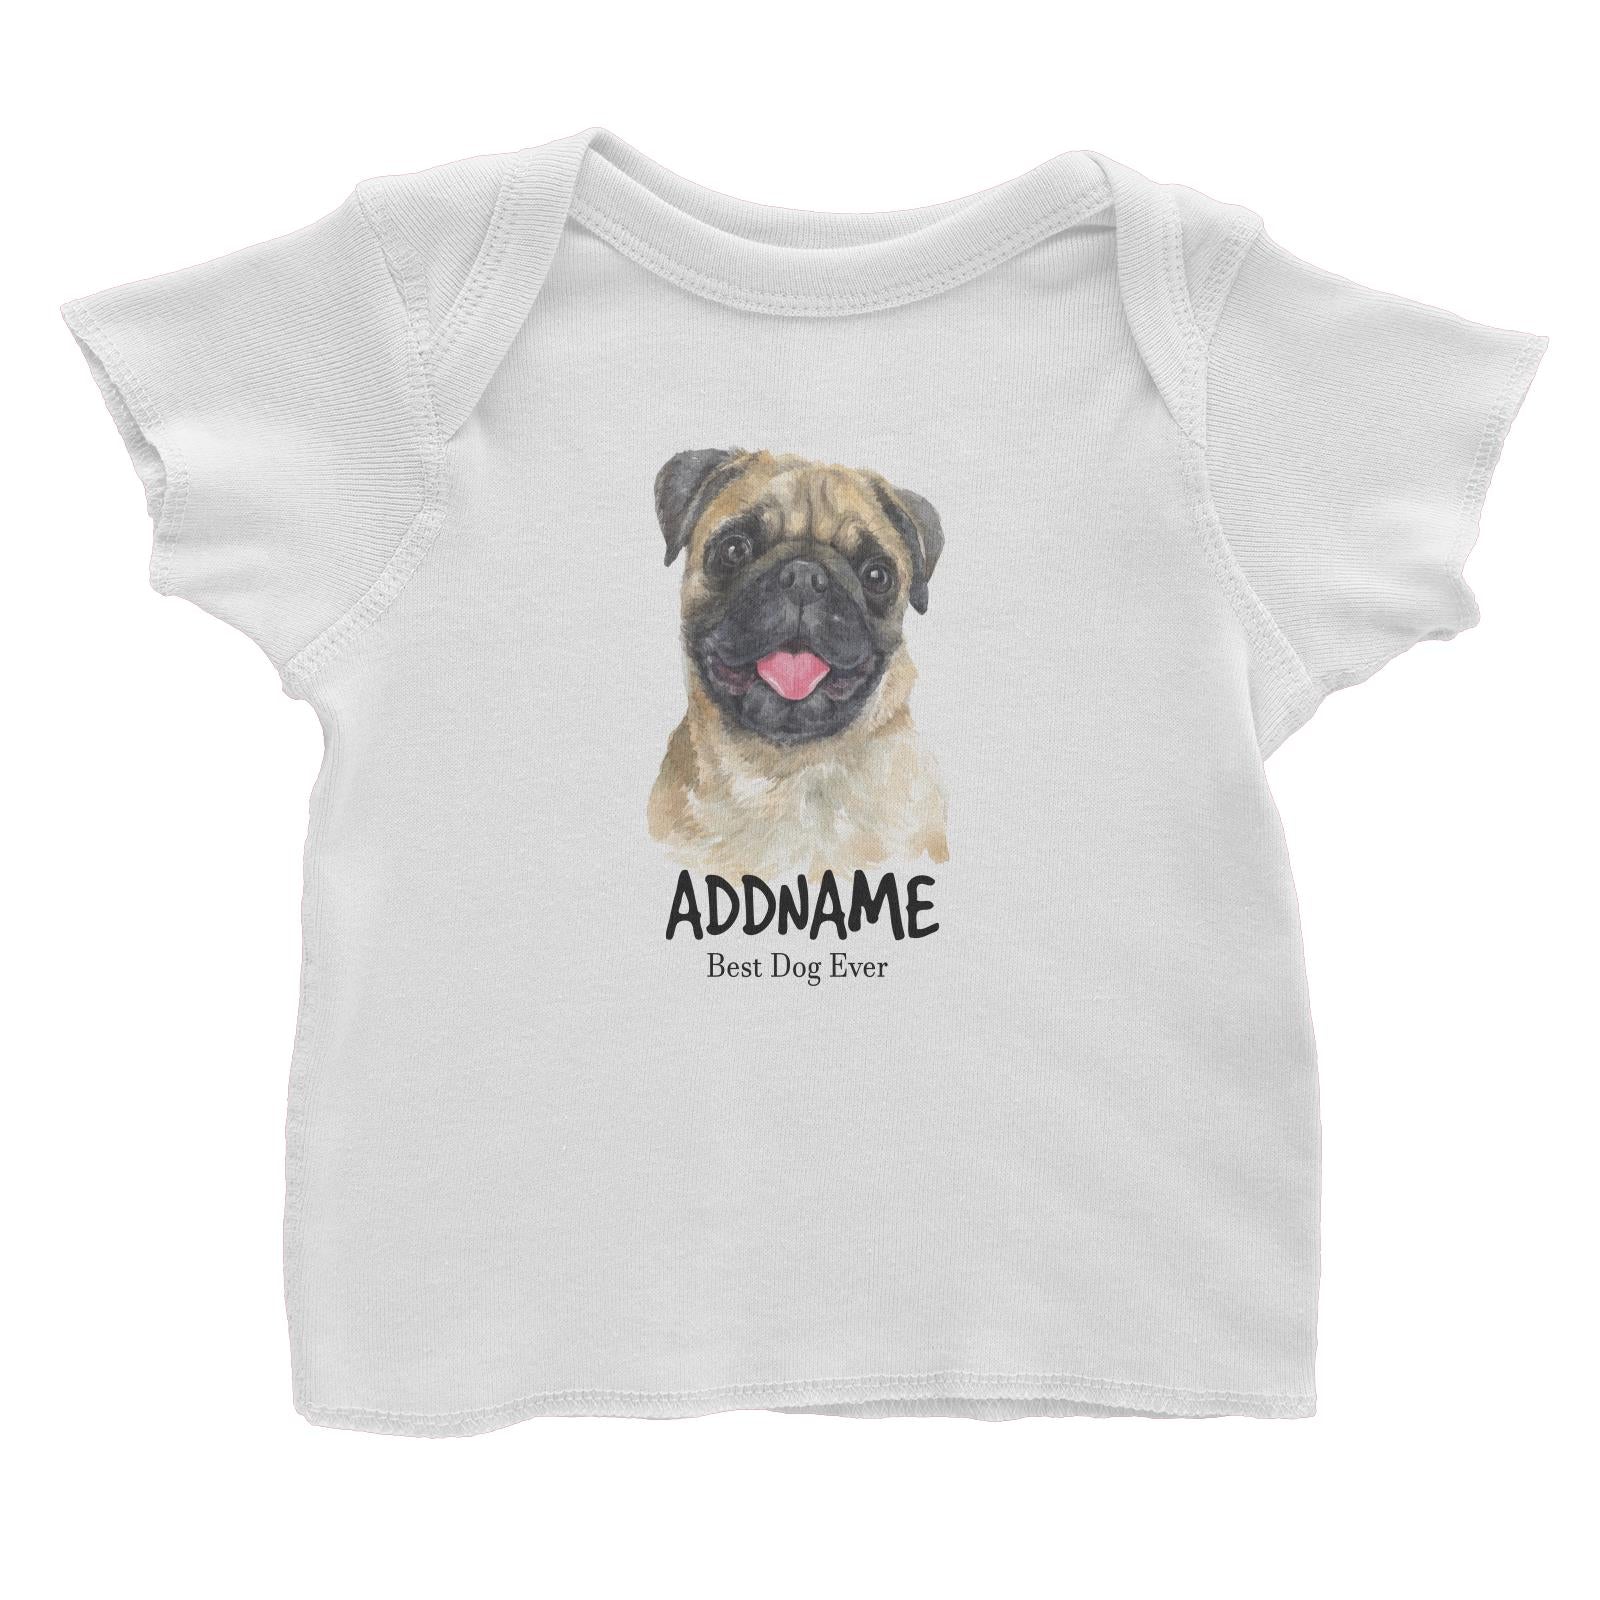 Watercolor Dog Pug Happy Best Dog Ever Addname Baby T-Shirt